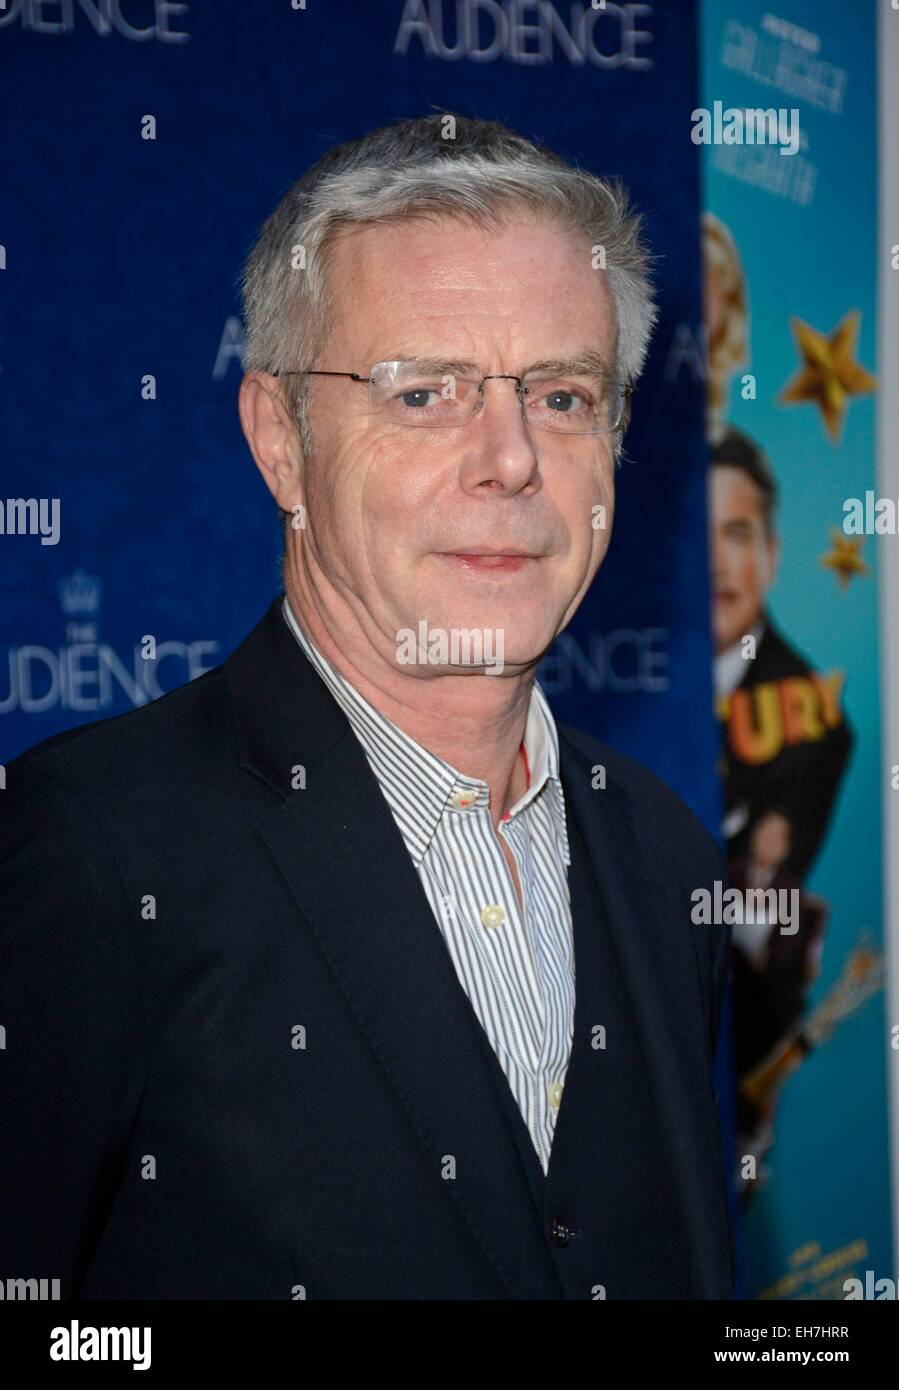 New York, NY, USA. 8th Mar, 2015. Stephen Daldry in attendance for THE AUDIENCE Opening Night on Broadway, Gerald Schoenfeld Theatre, New York, NY March 8, 2015. Credit:  Derek Storm/Everett Collection/Alamy Live News Stock Photo